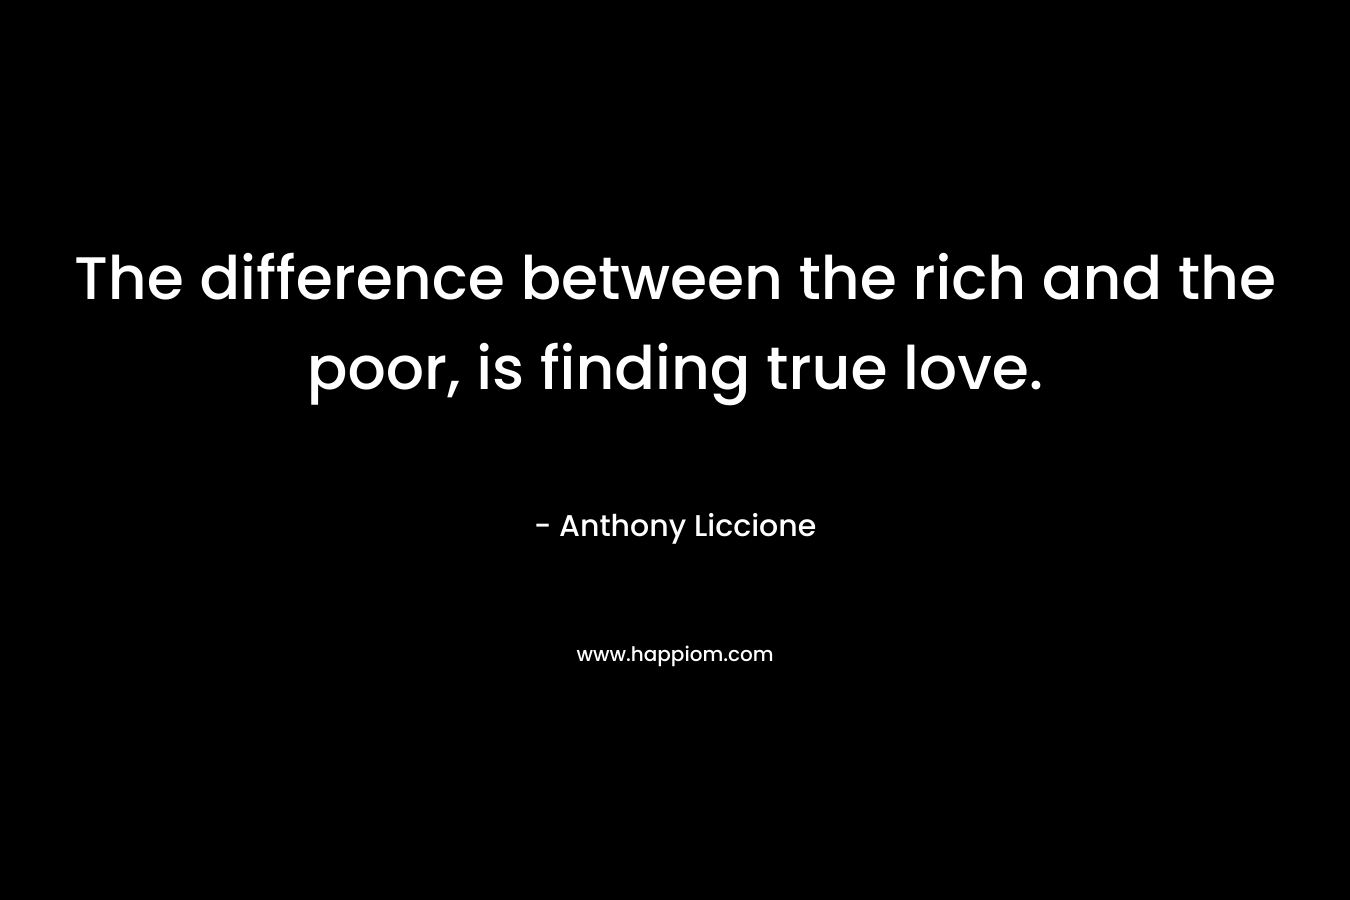 The difference between the rich and the poor, is finding true love.